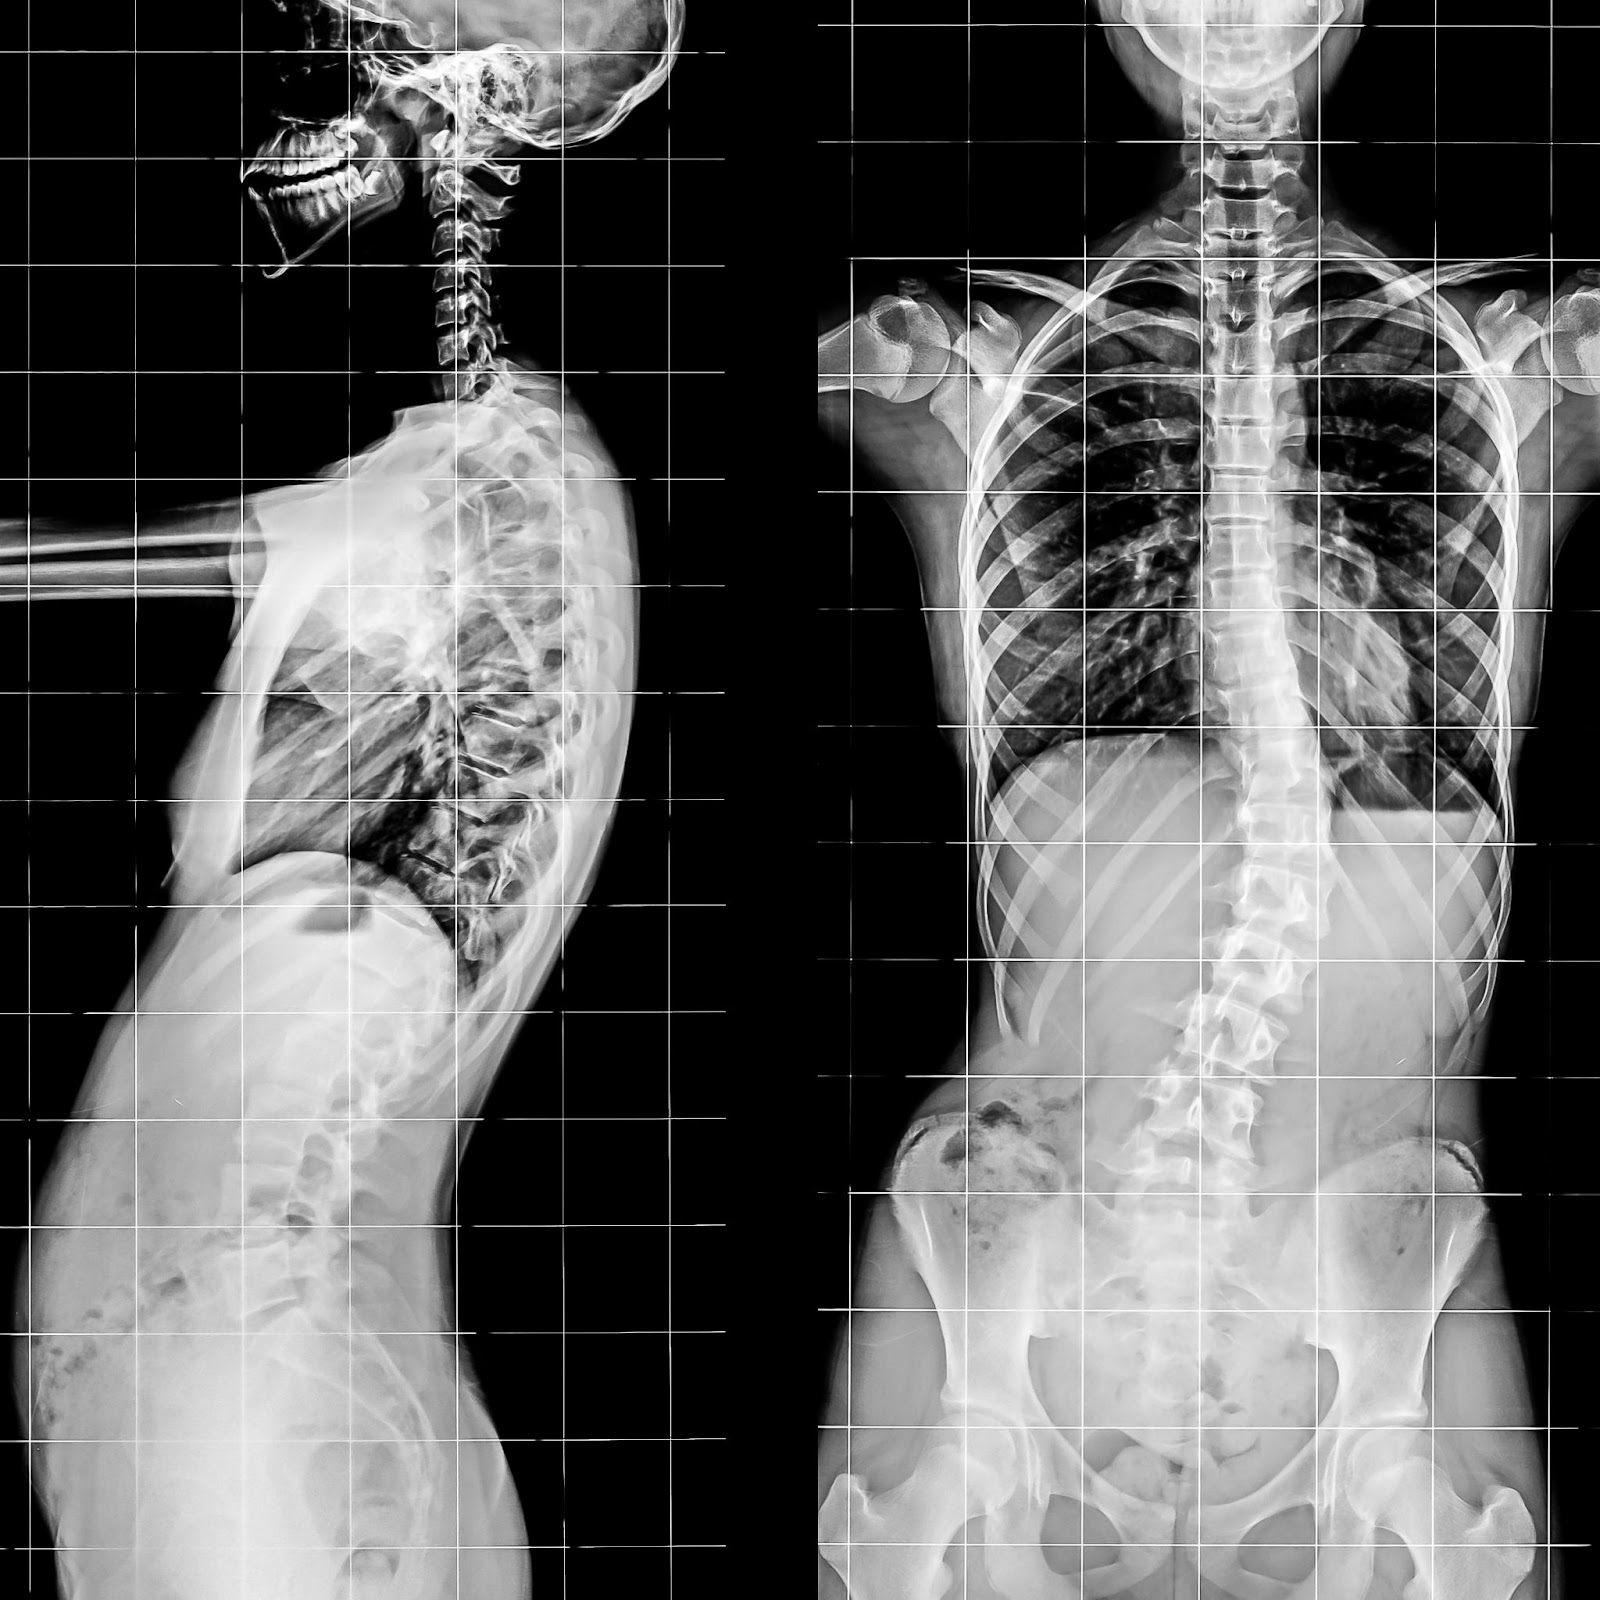 X-ray of the Spinal Column and Pelvis of human skeleton showing moderate scoliosis